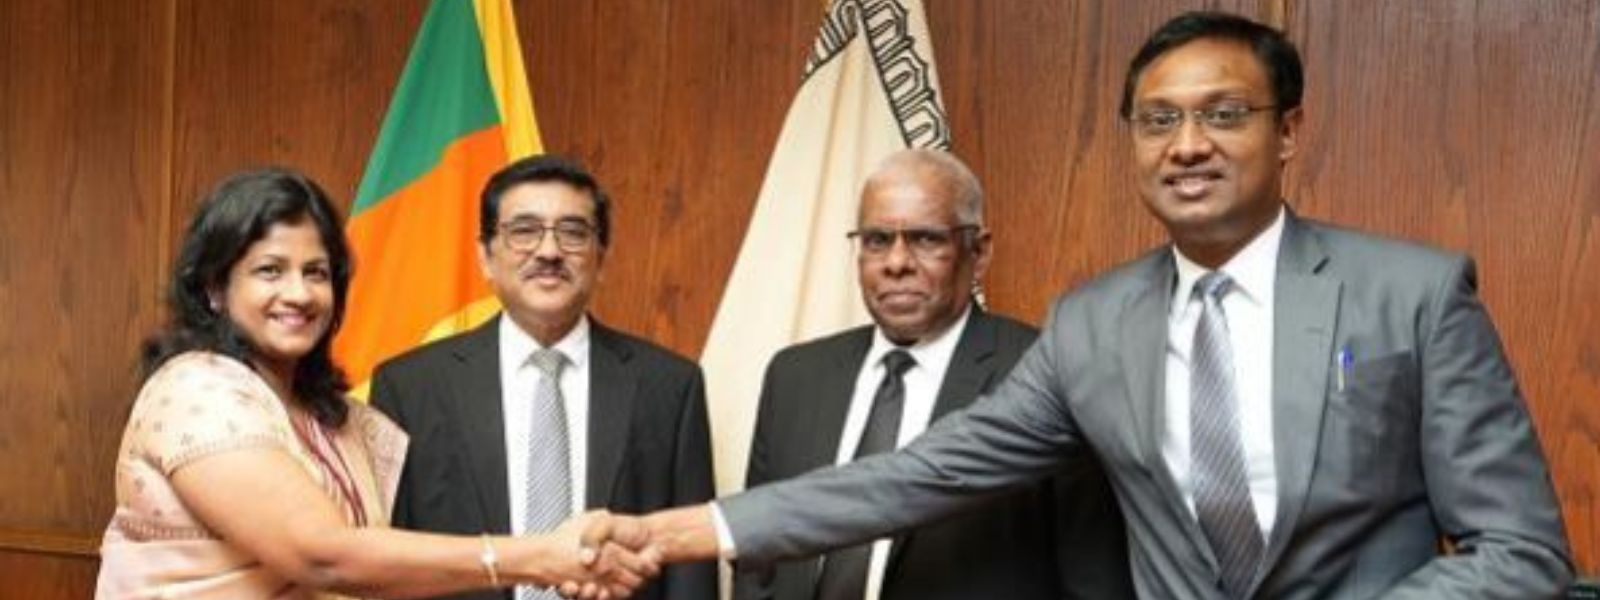 FIU enters MoU with Bribery Commission